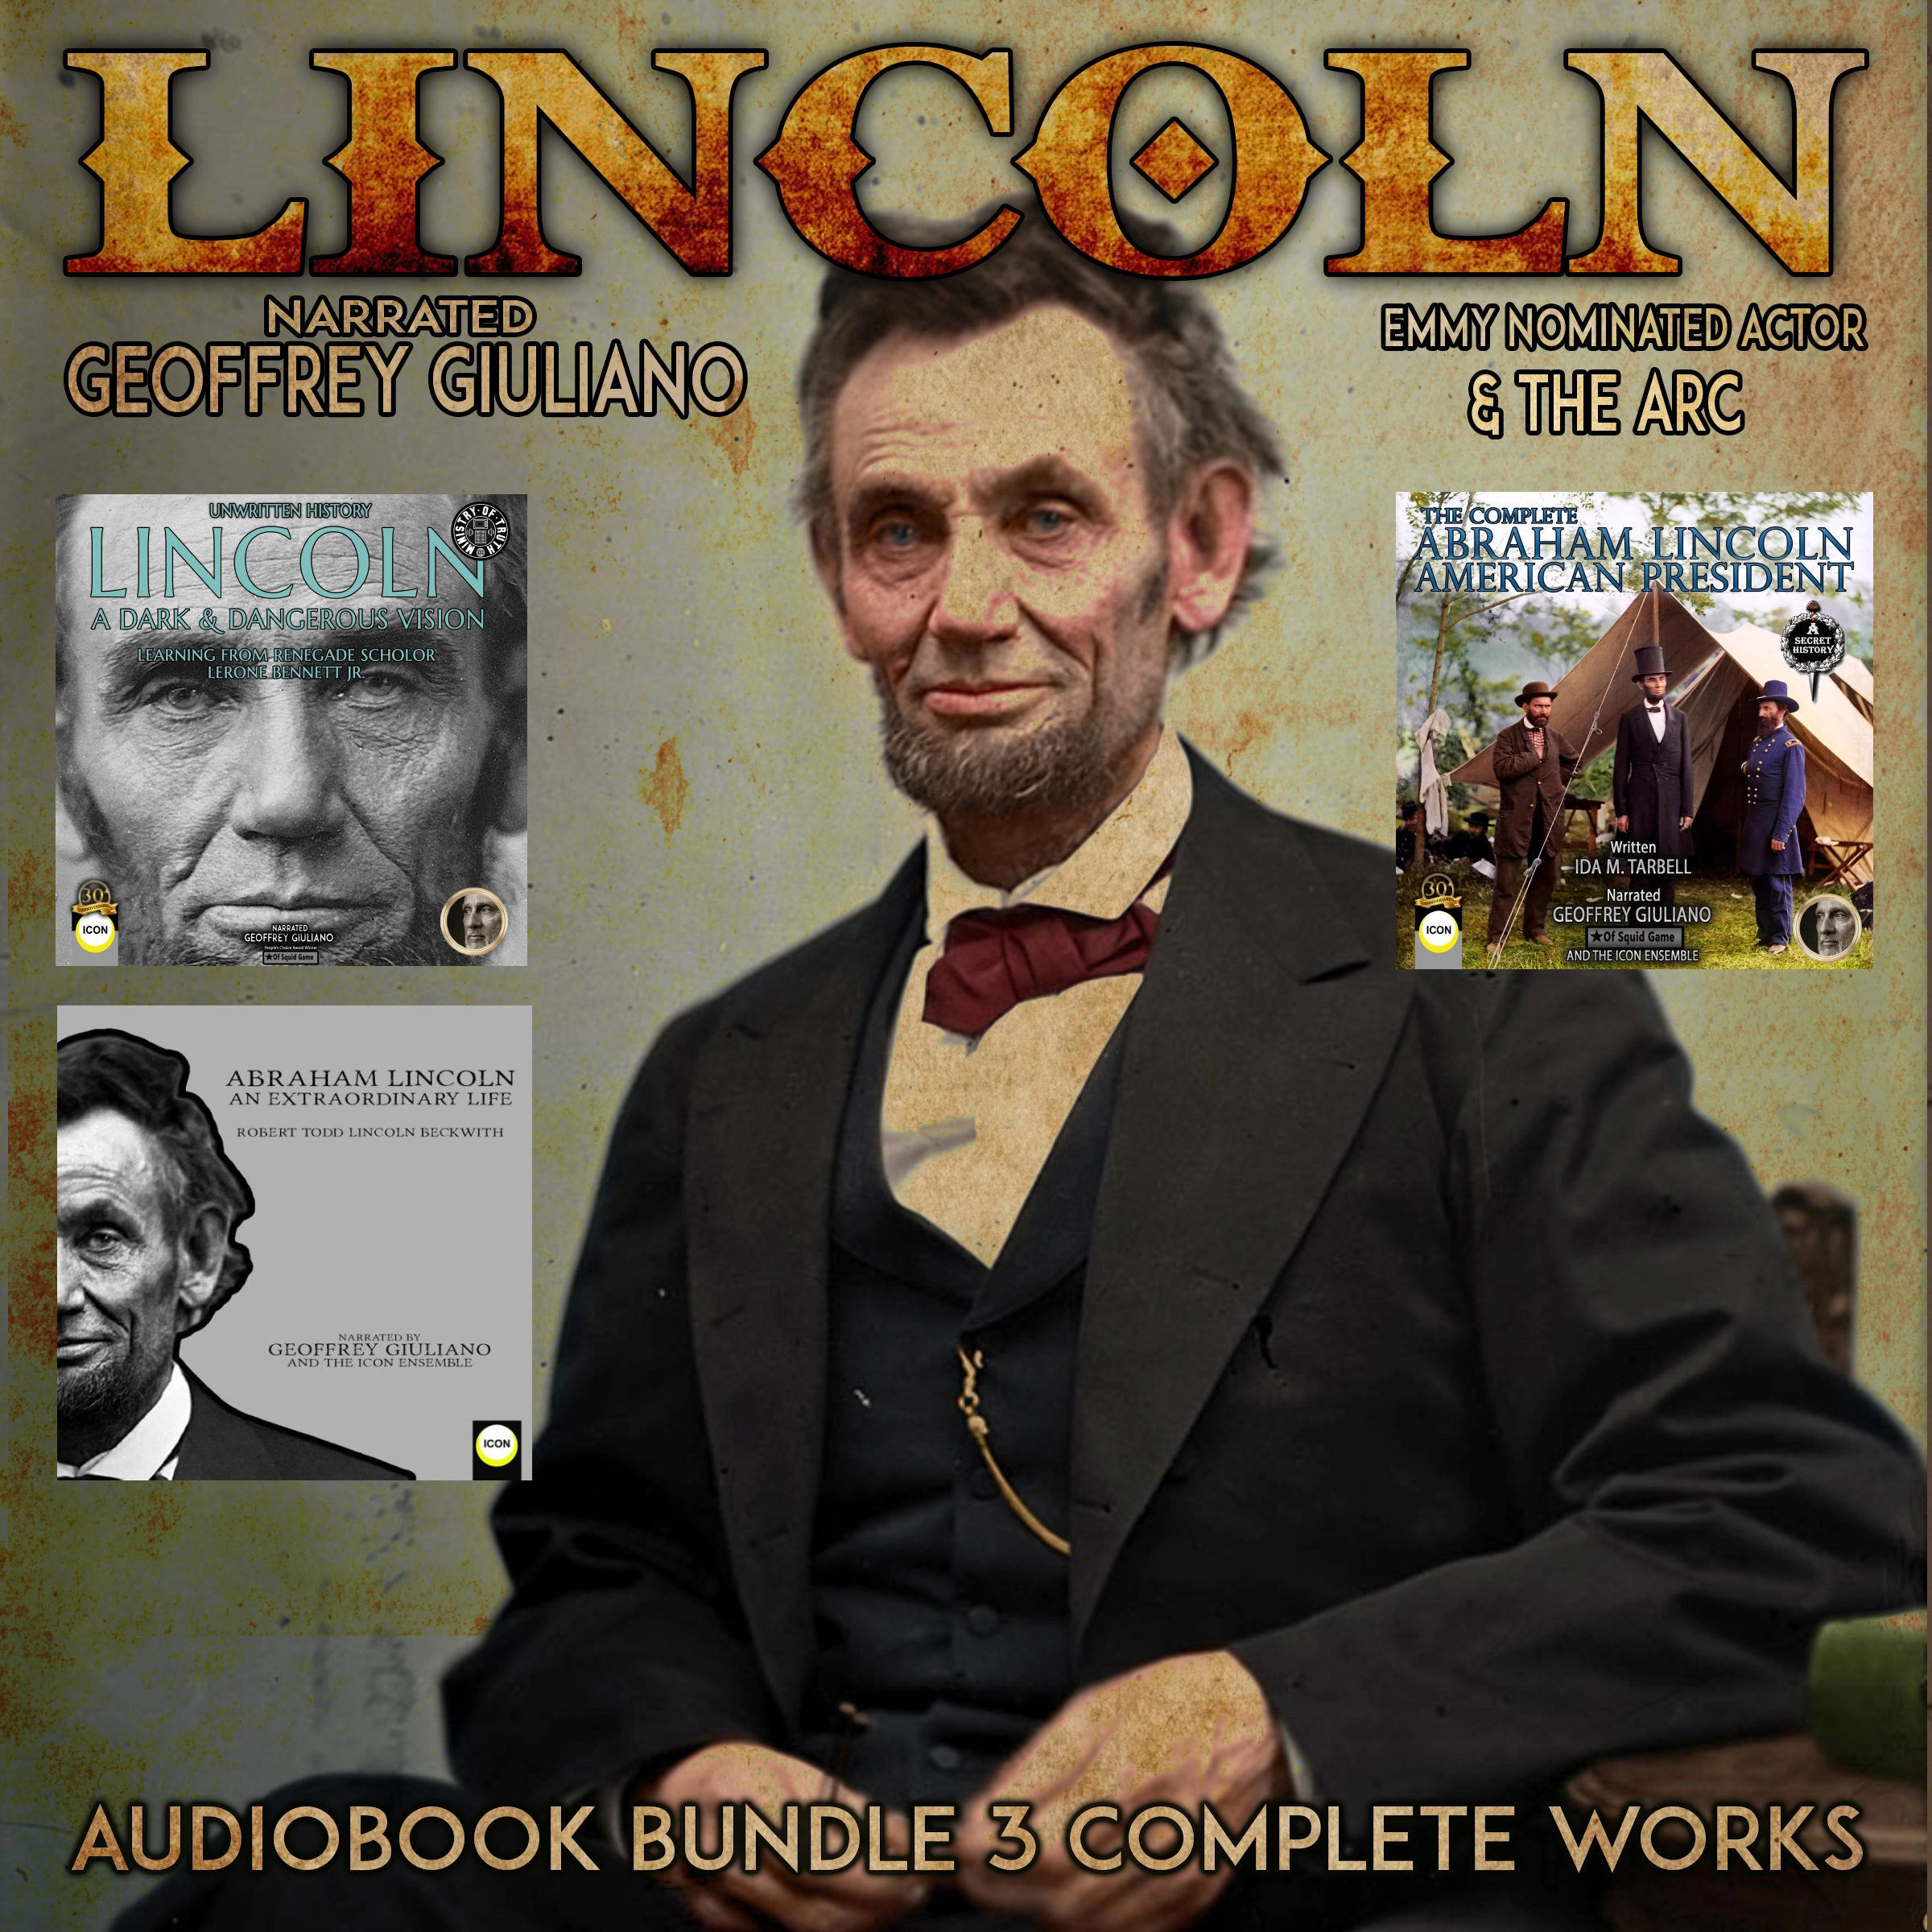 Lincoln 3 Complete Works by Geoffrey Giuliano Audiobook